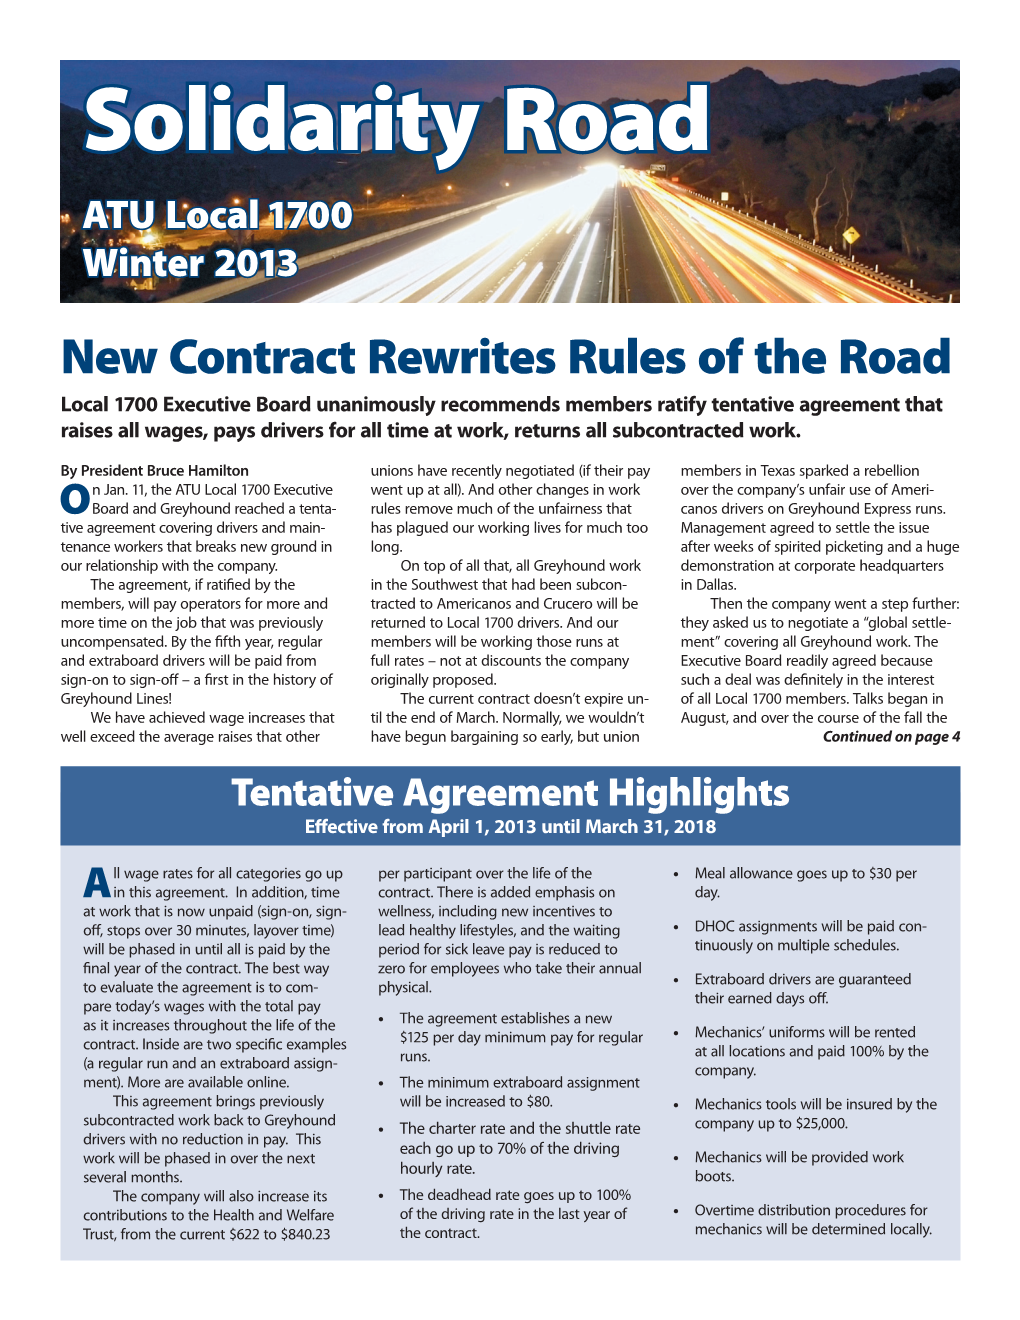 New Contract Rewrites Rules of the Road